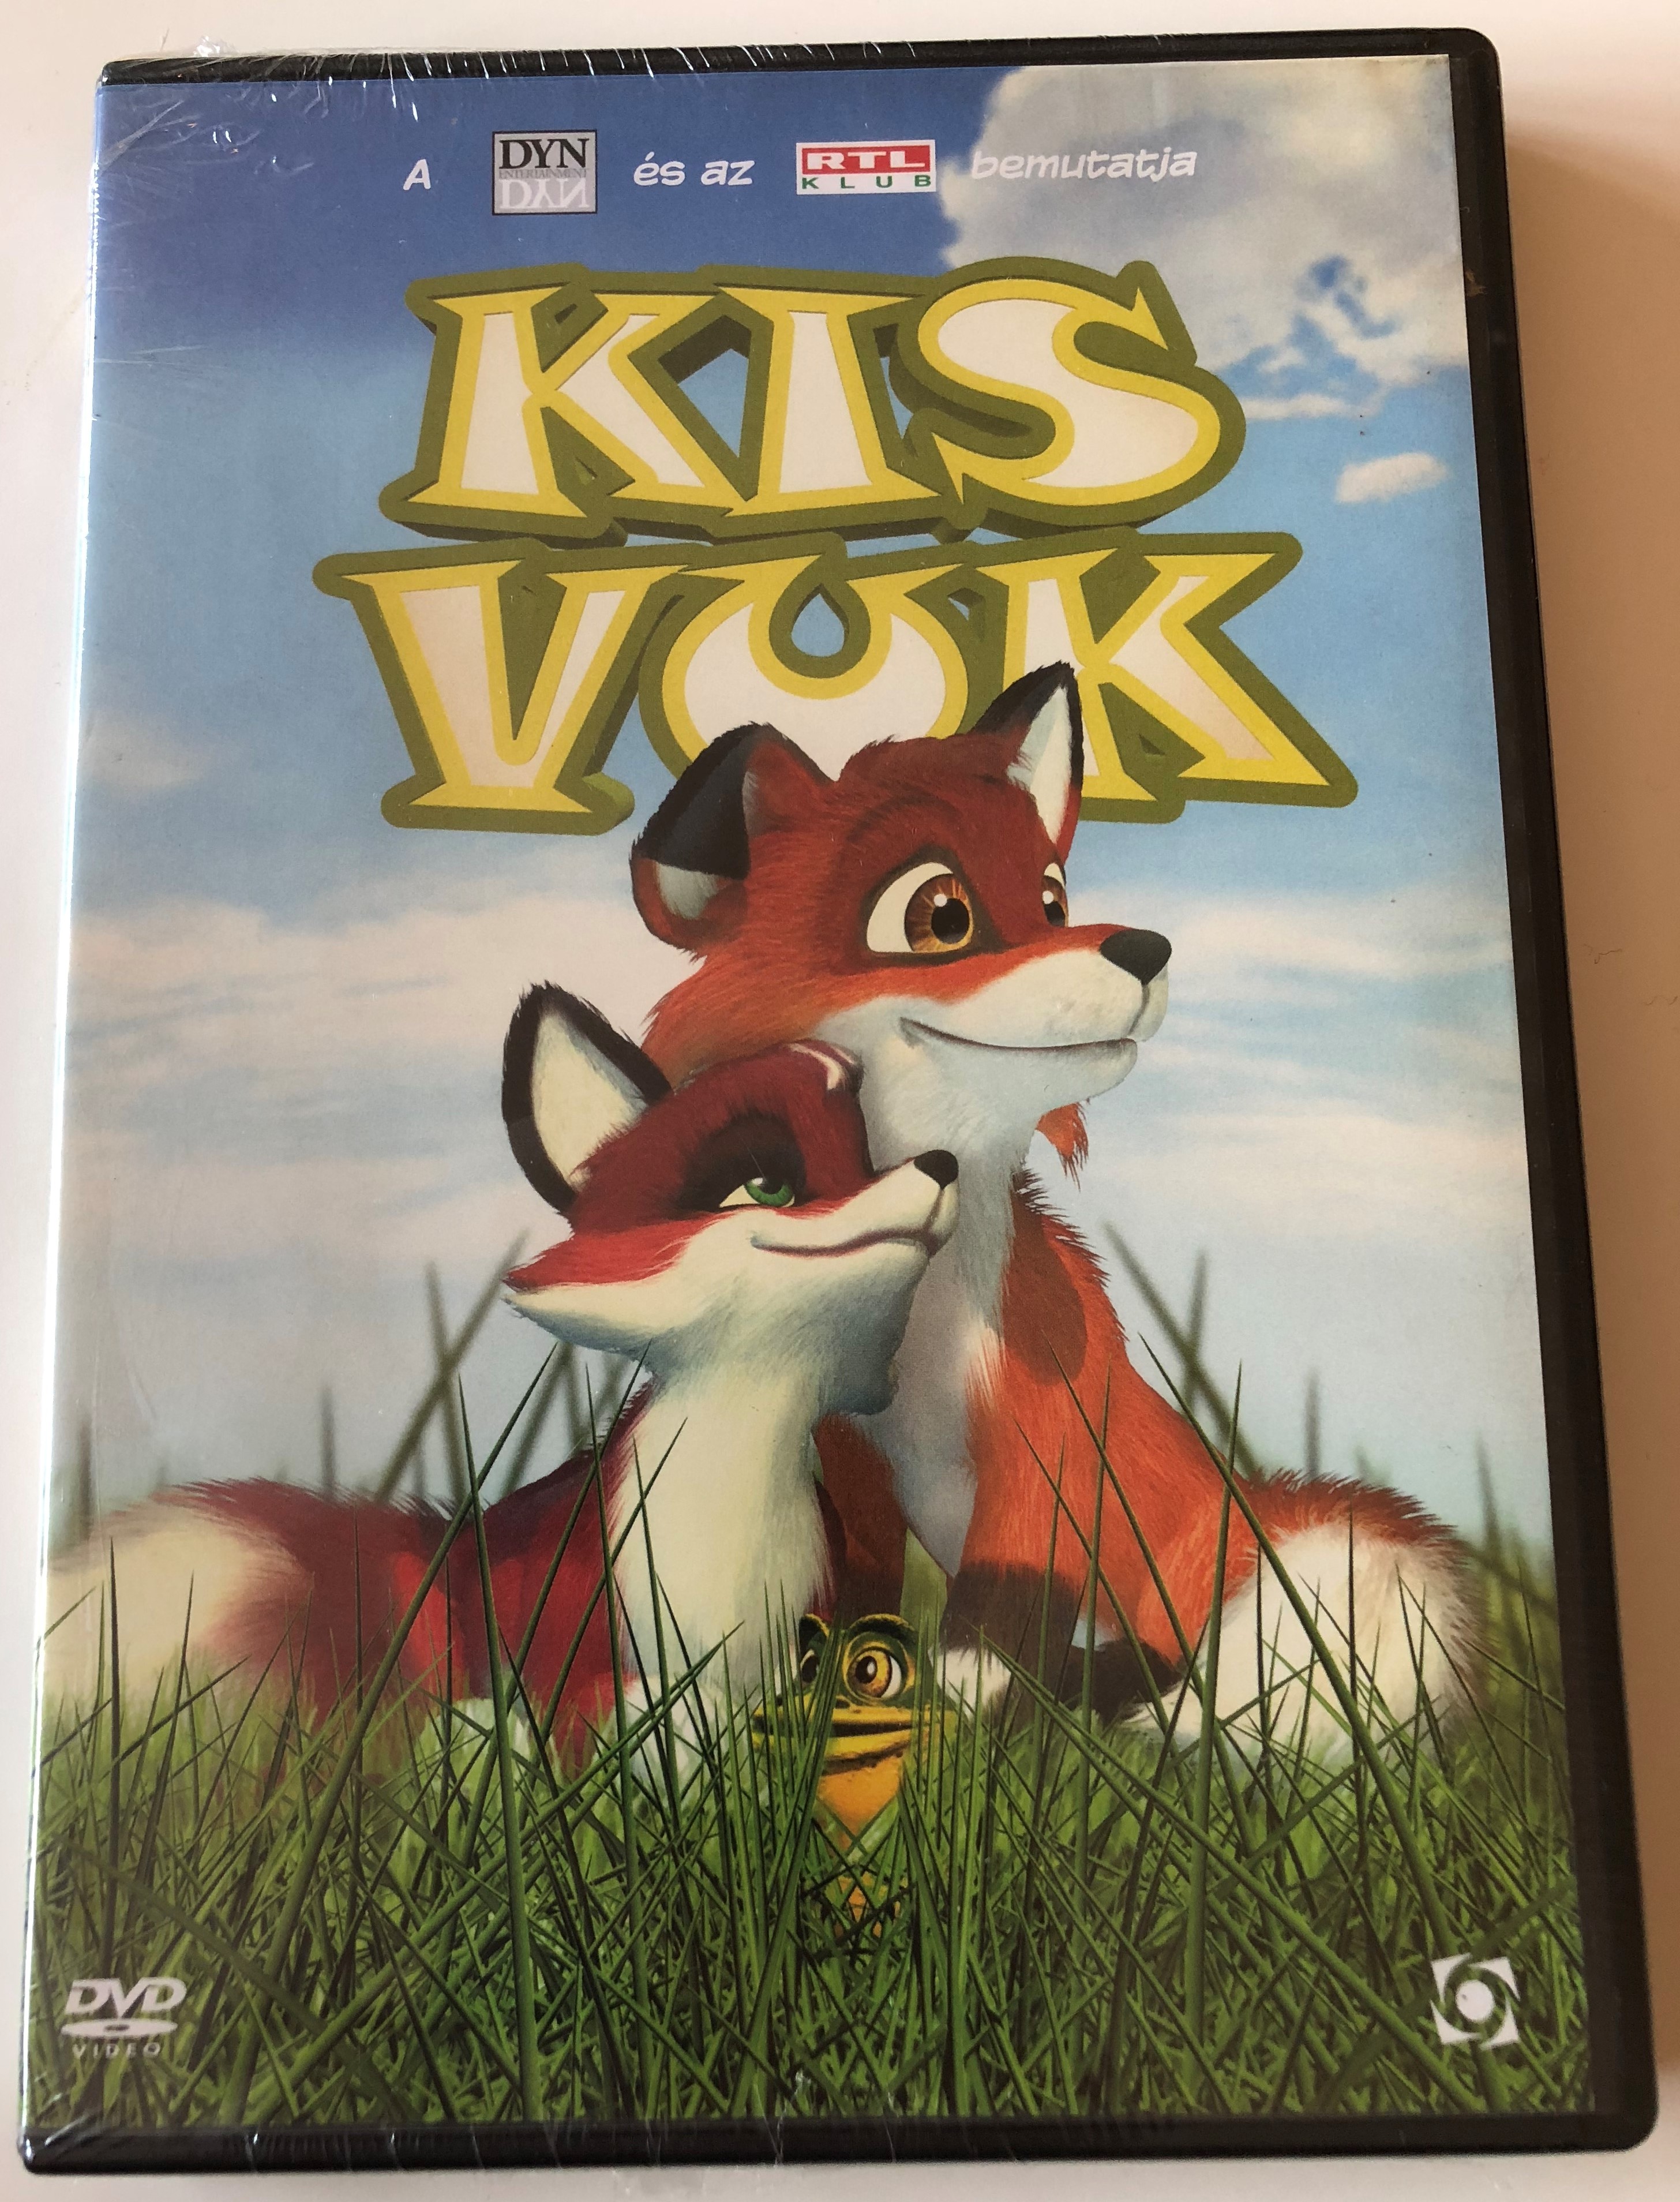 kis-vuk-dvd-2008-a-fox-s-tale-directed-by-g-t-gy-rgy-uzs-k-lajos-written-by-fekete-istv-n-1-.jpg